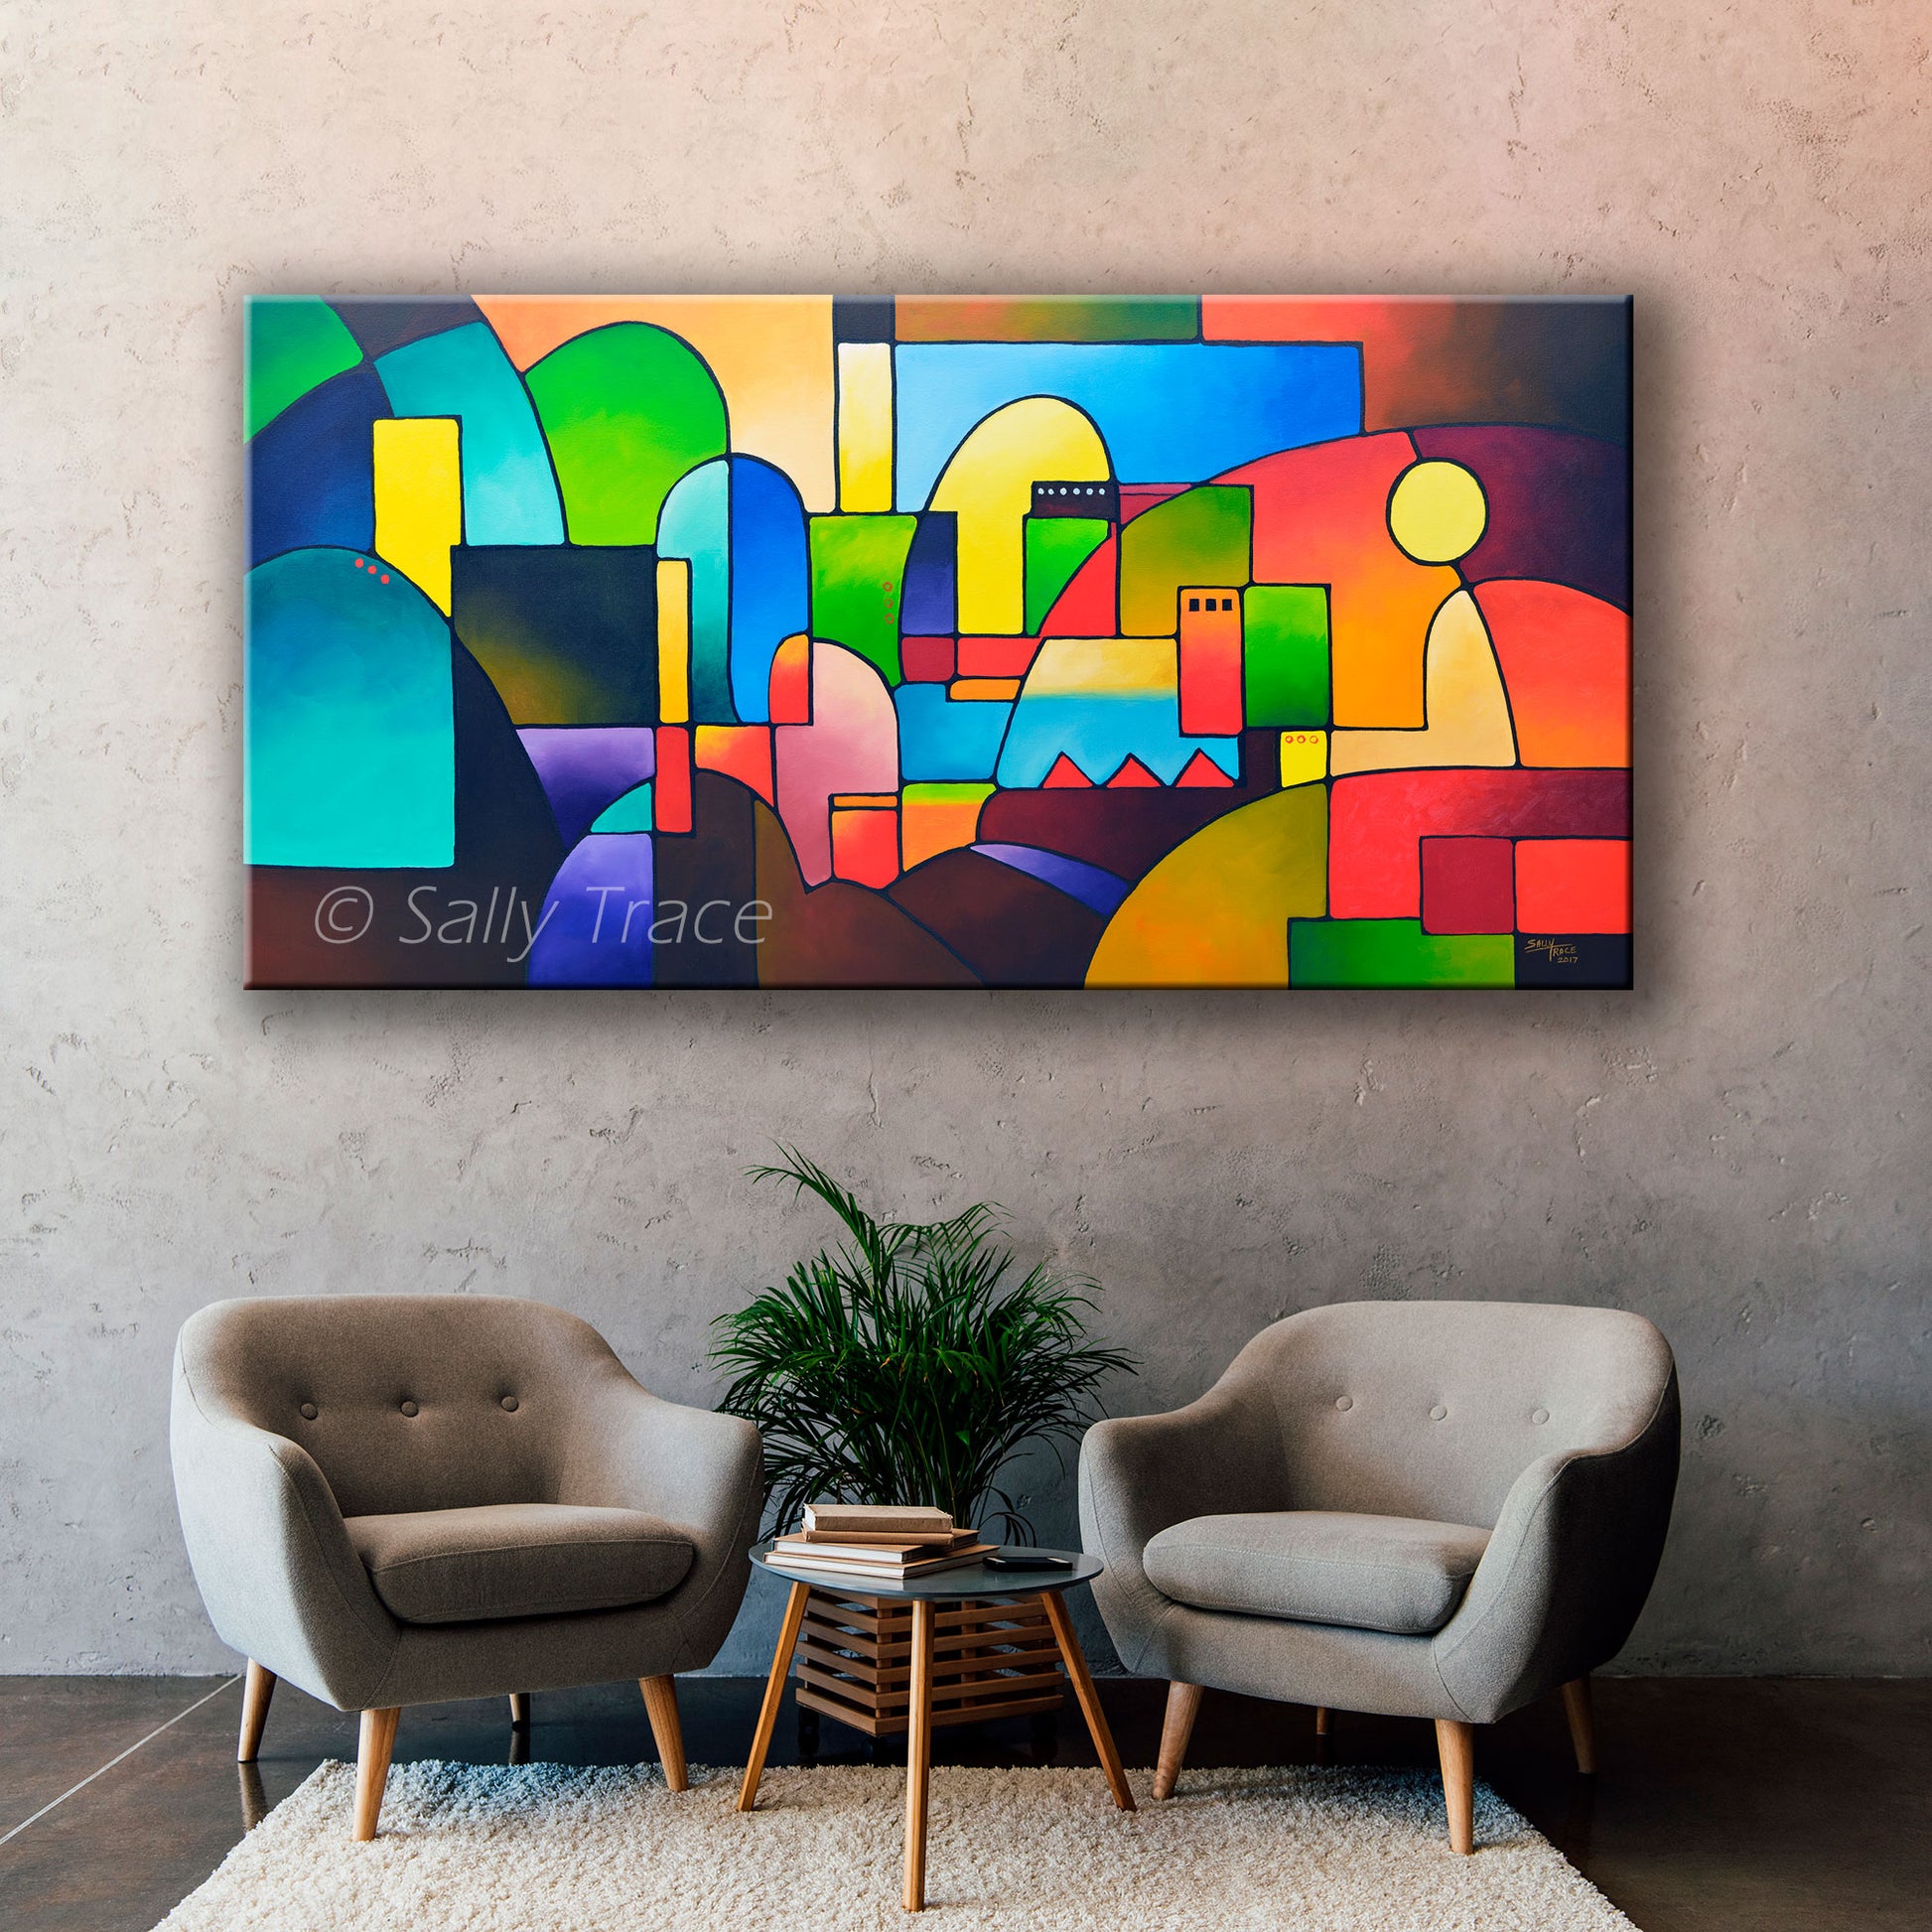 Geometric abstraction, original abstract painting commission by Sally Trace "Urbanity 2", room view